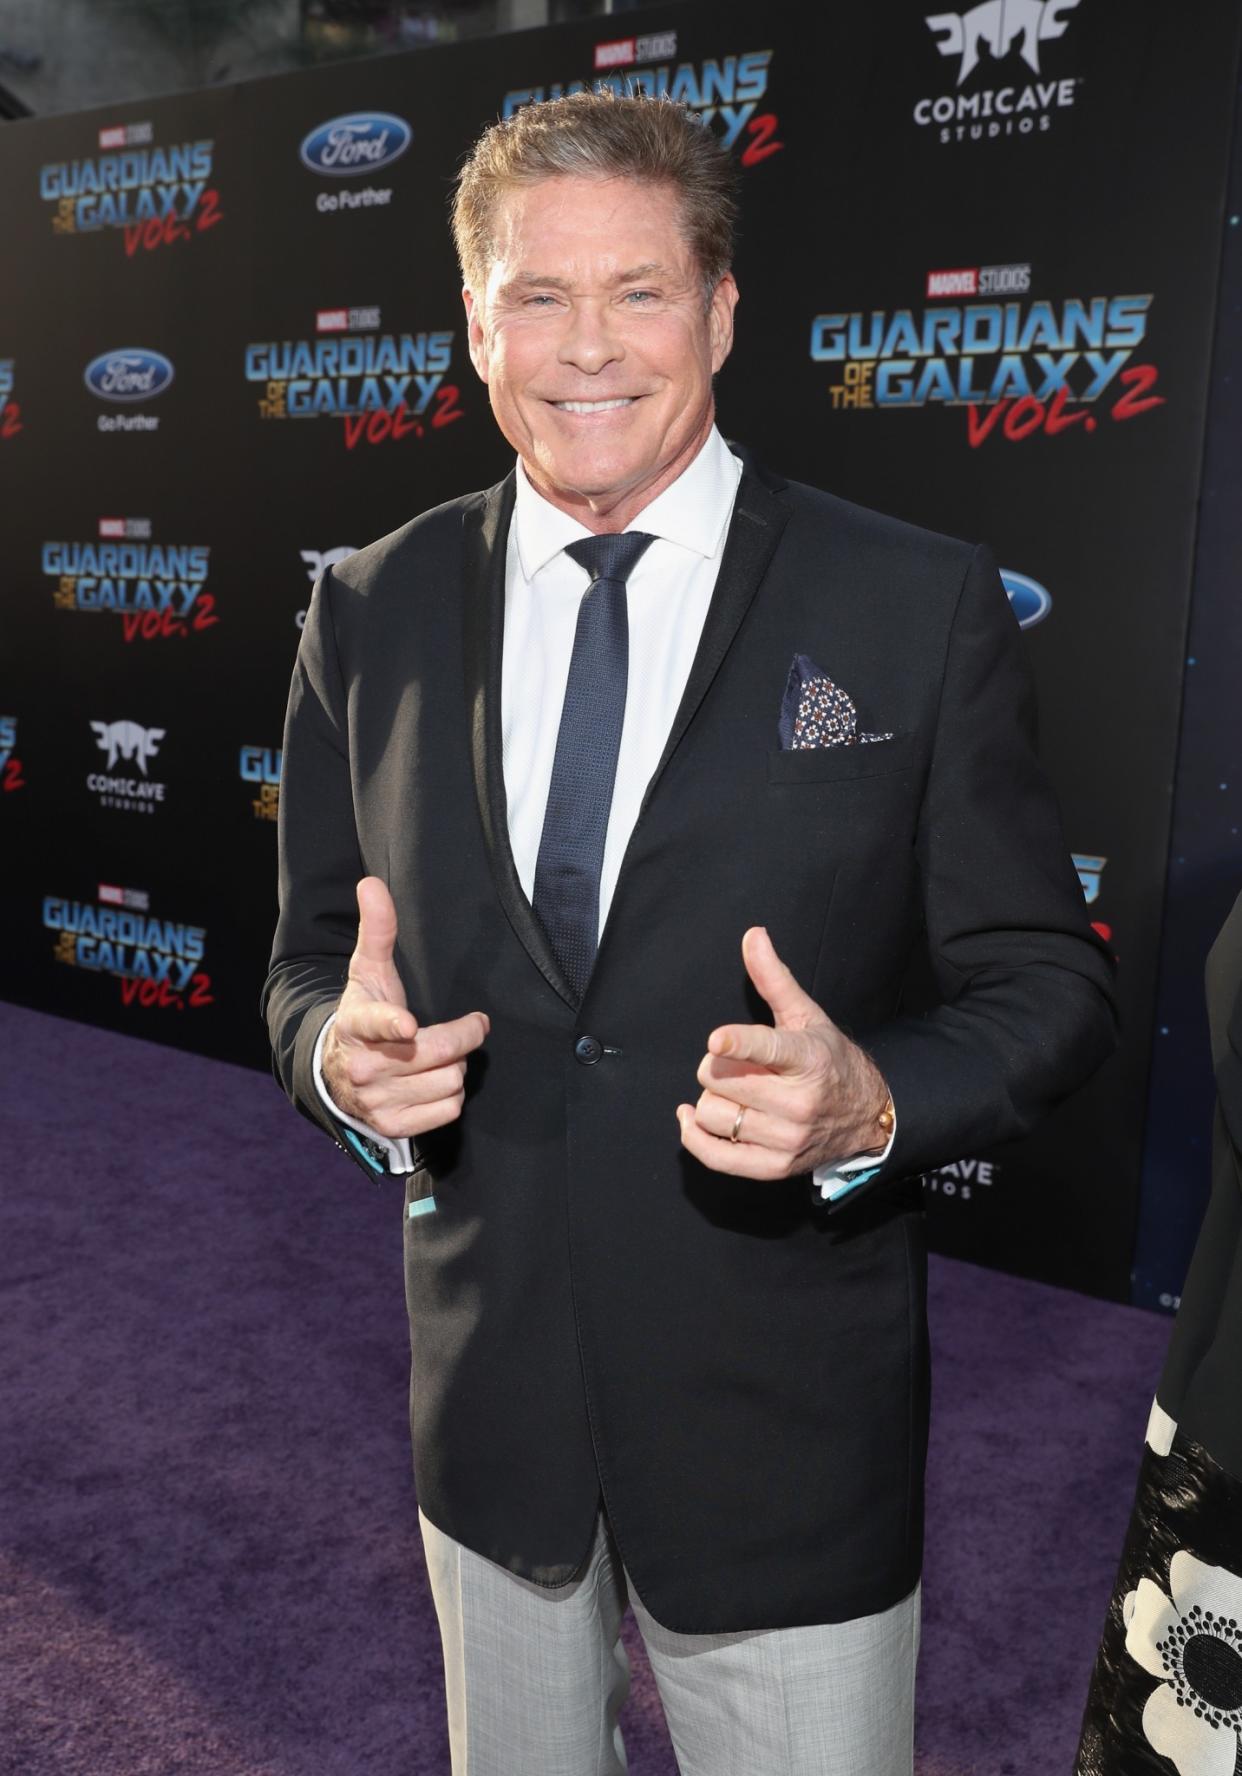 David Hasselhoff at “Guardians of the Galaxy Vol. 2”” world premiere in Hollywood. (Photo: Rich Polk/Getty Images for Disney)